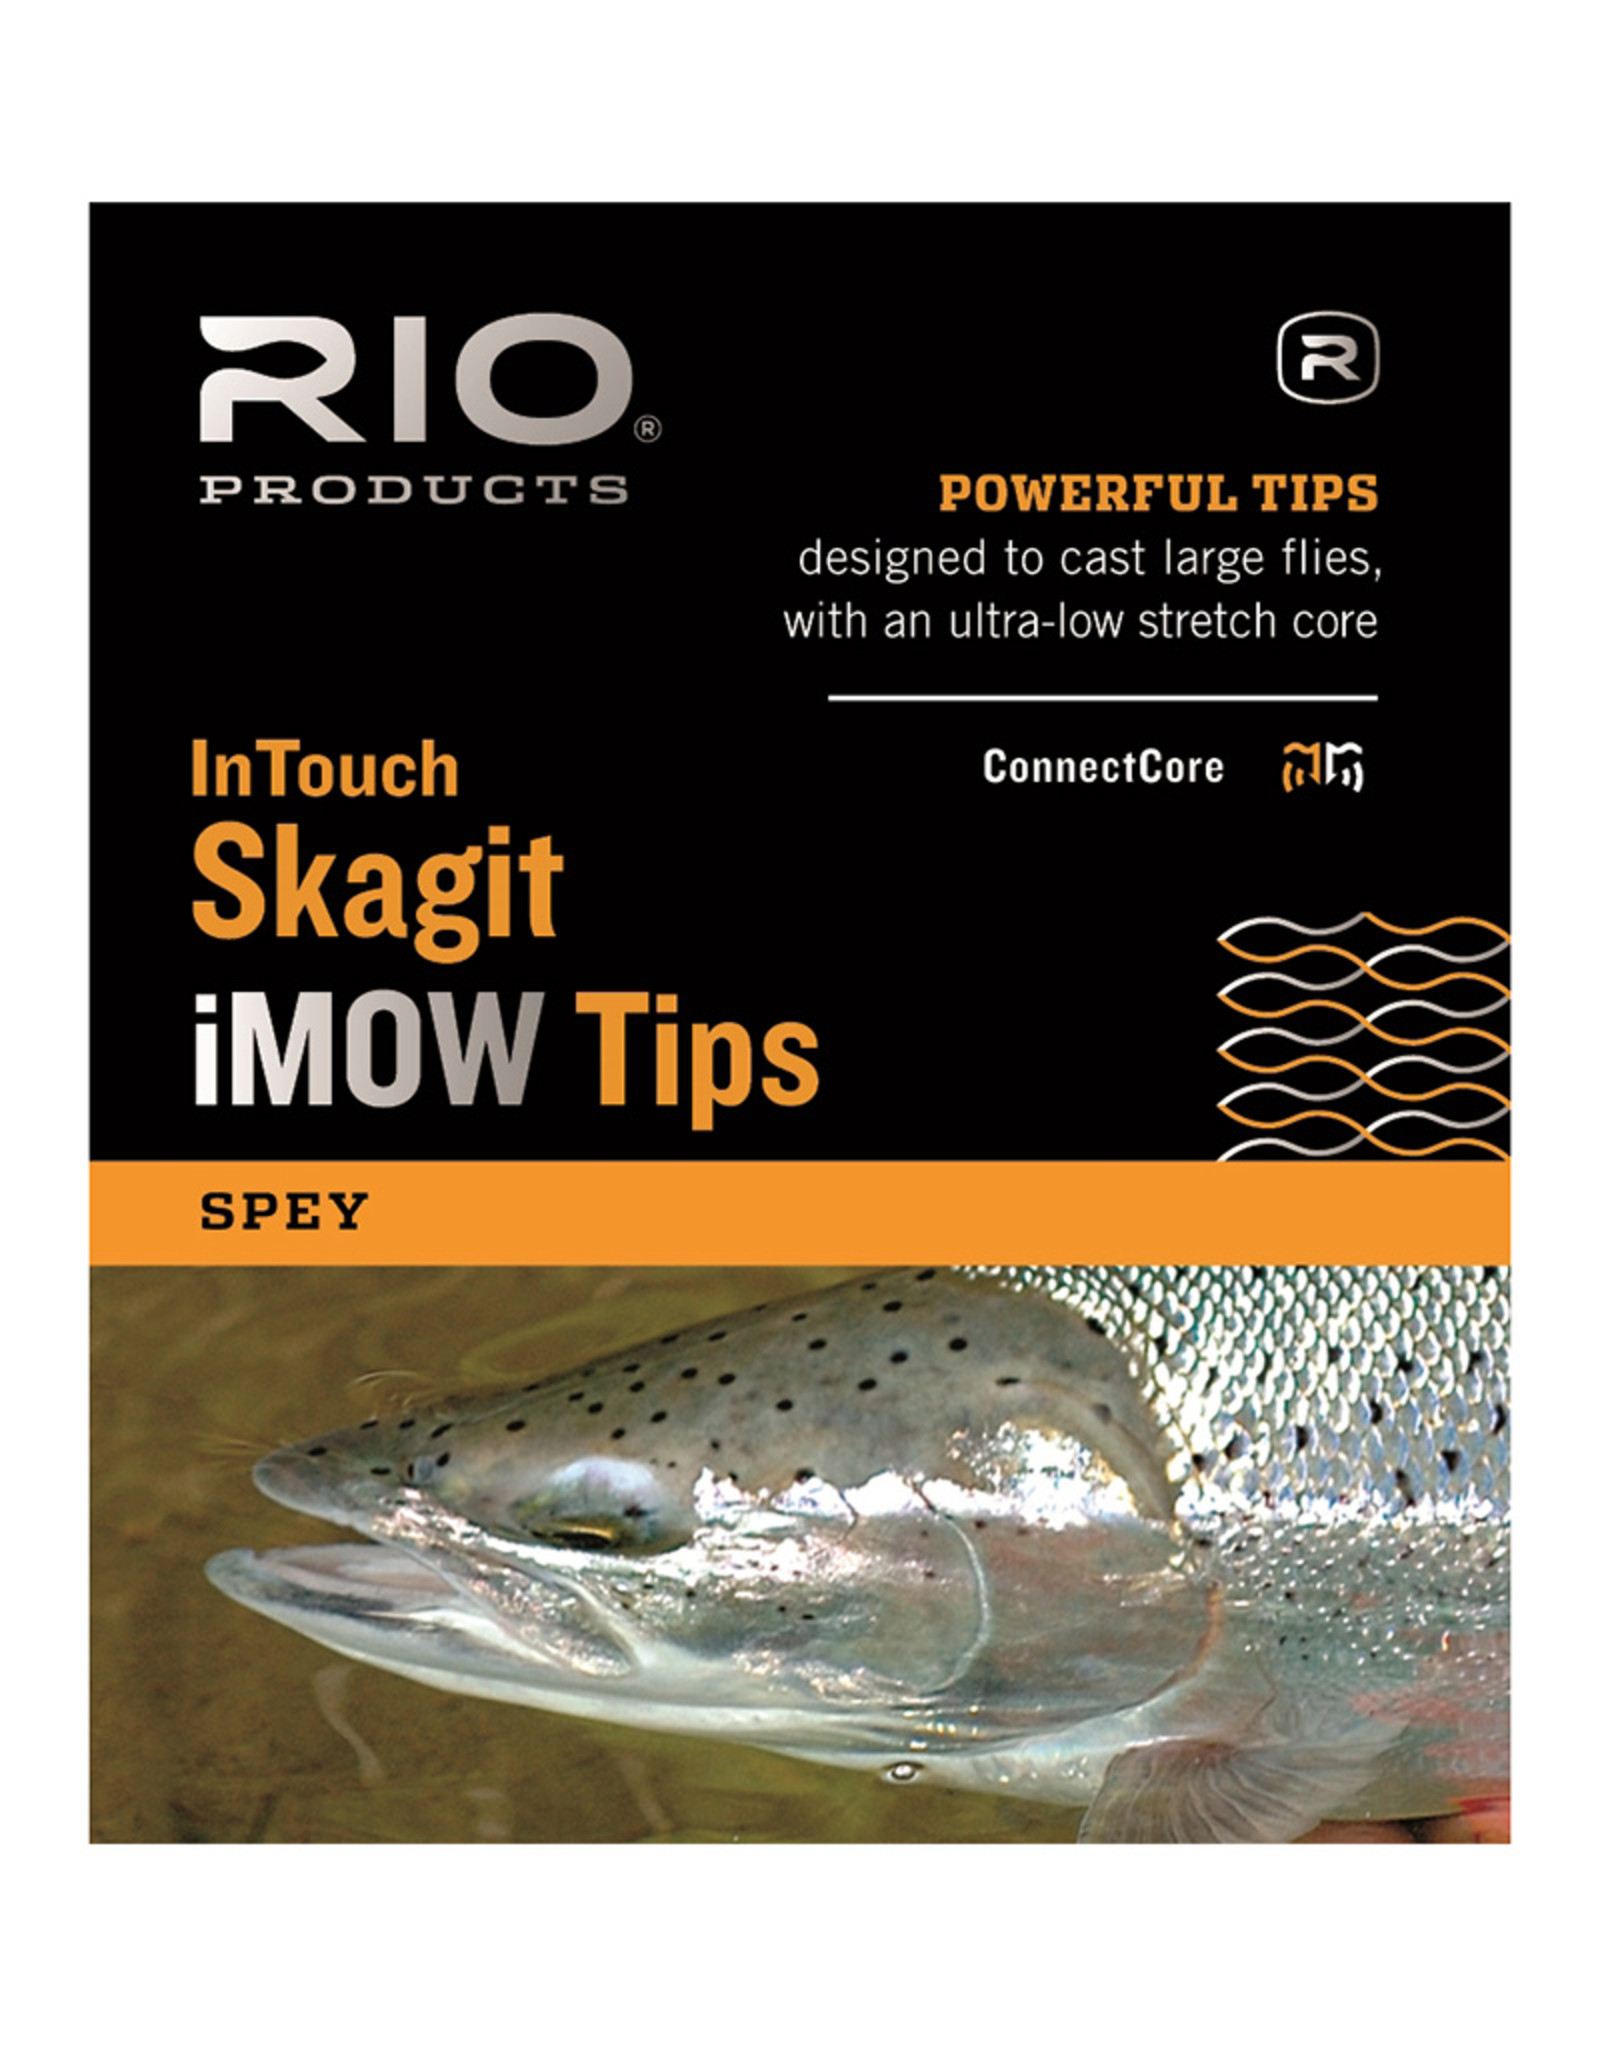 RIO Products Skagit iMOW Tips